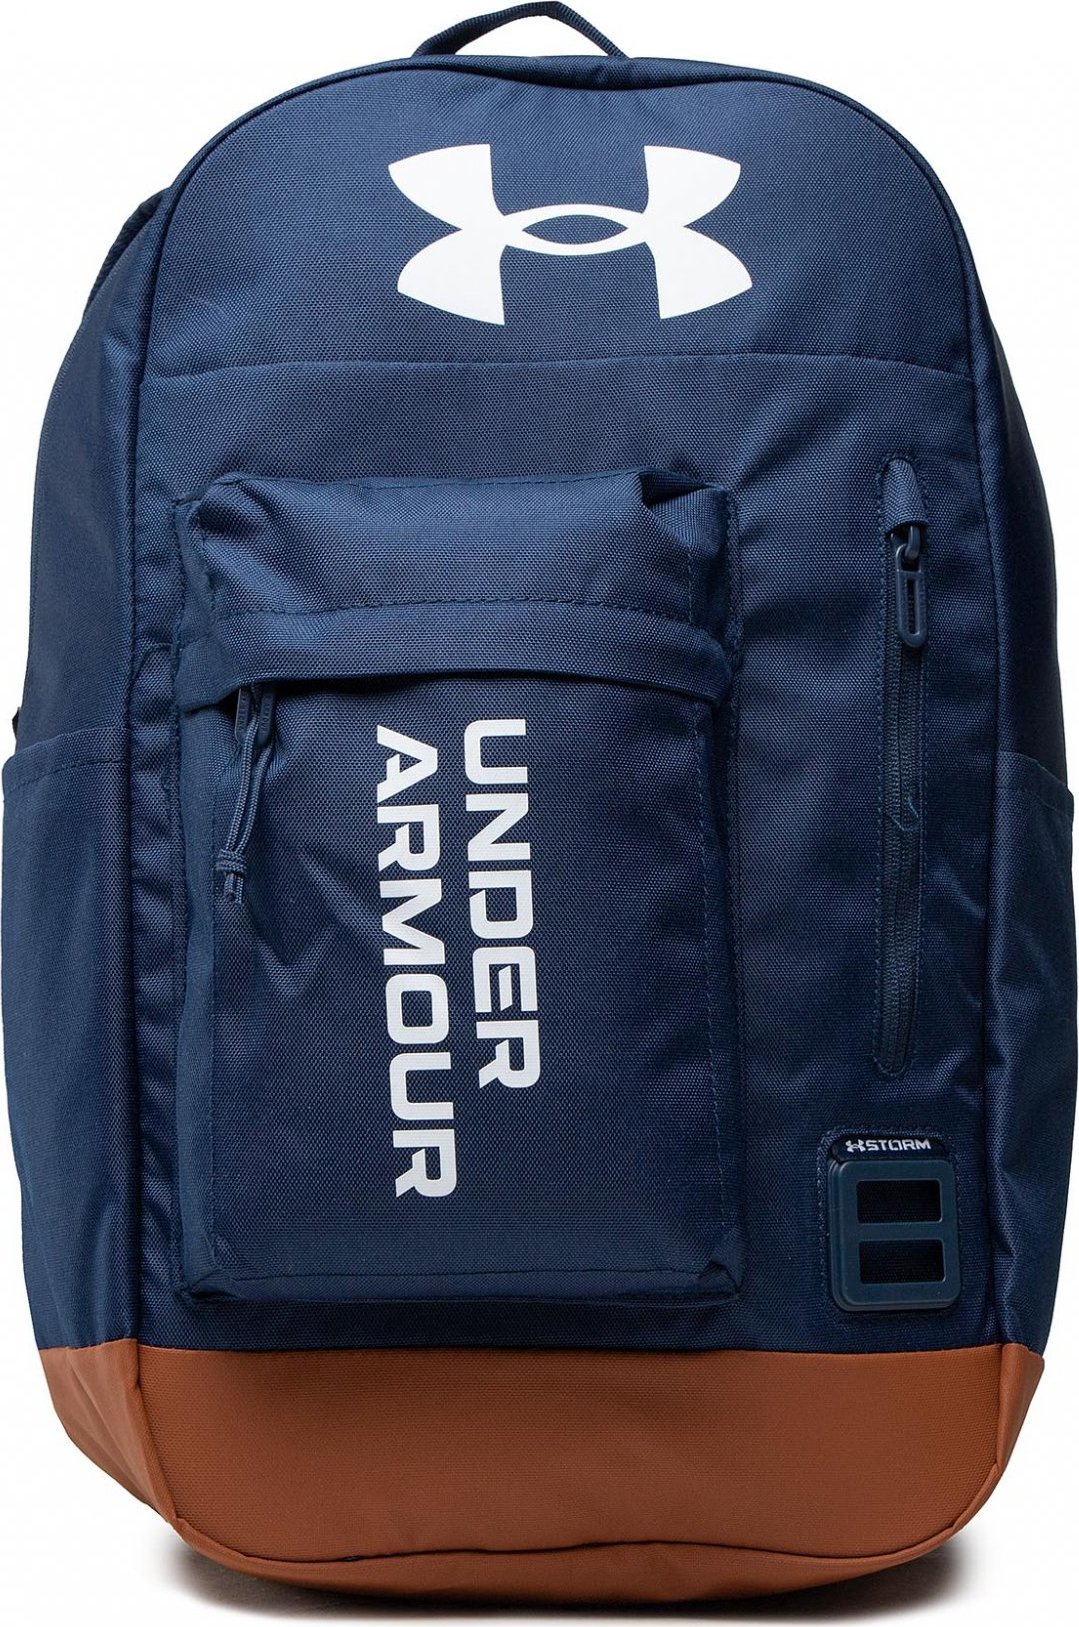 Under Armour Halftime Backpack 1362365408-408